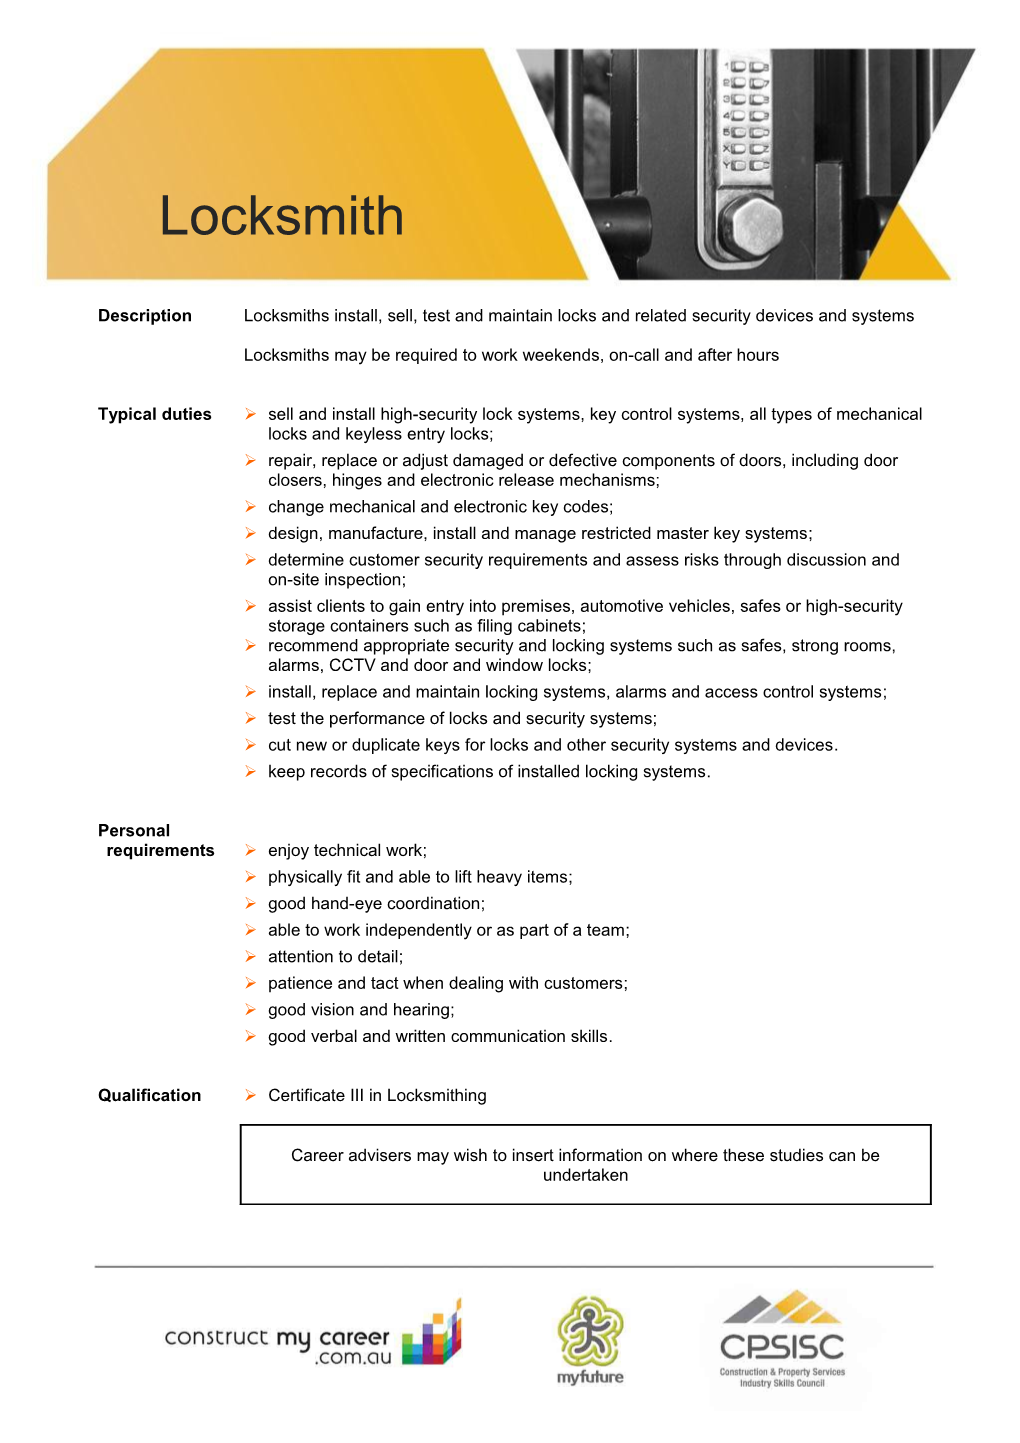 Locksmiths May Be Required to Work Weekends, On-Call and After Hours